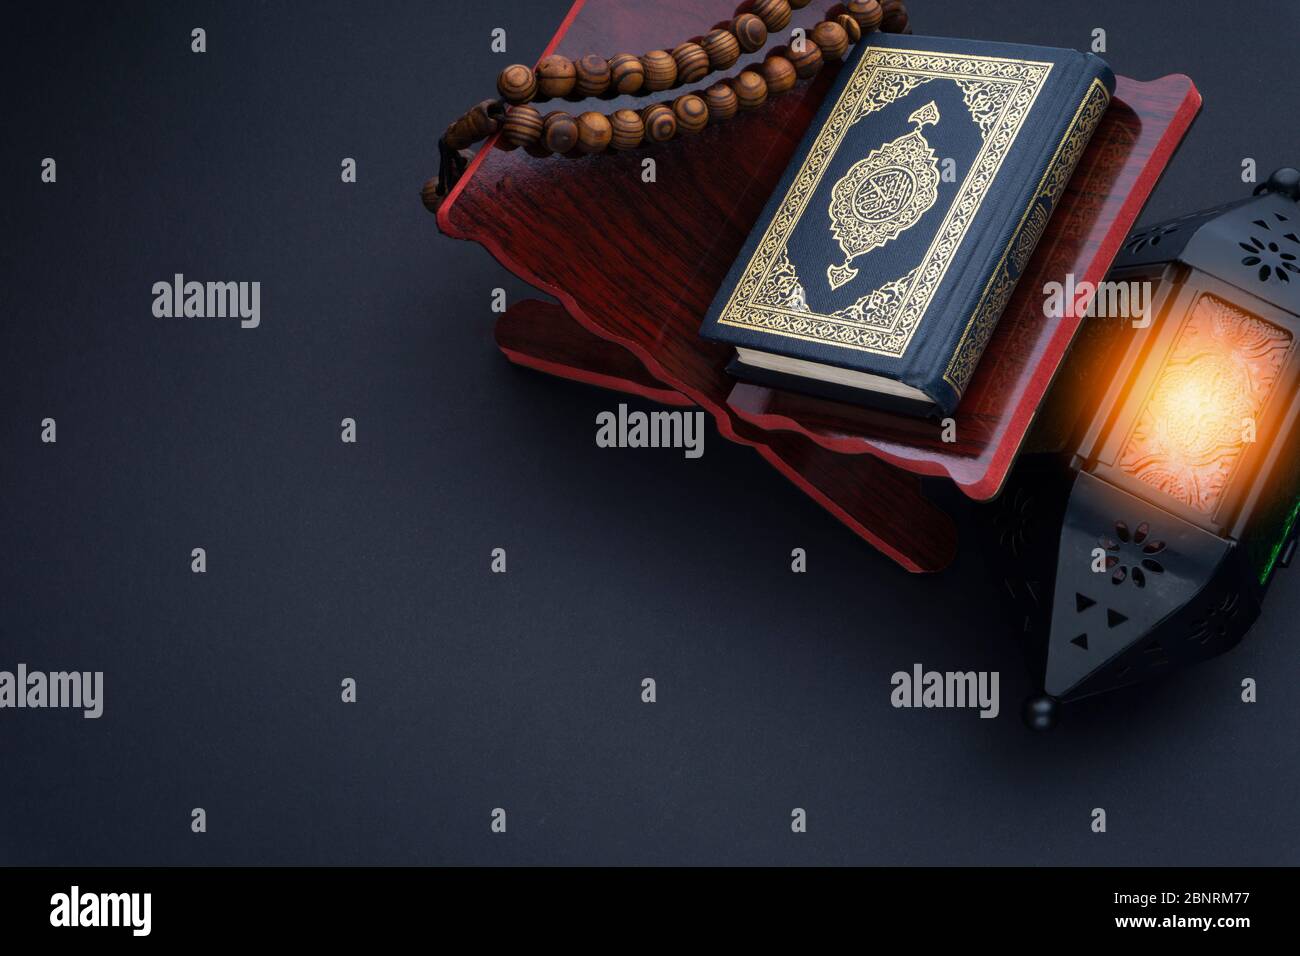 Holy Al Quran with written arabic calligraphy meaning of Al Quran, lantern lamp and rosary beads or tasbih on black background. Stock Photo